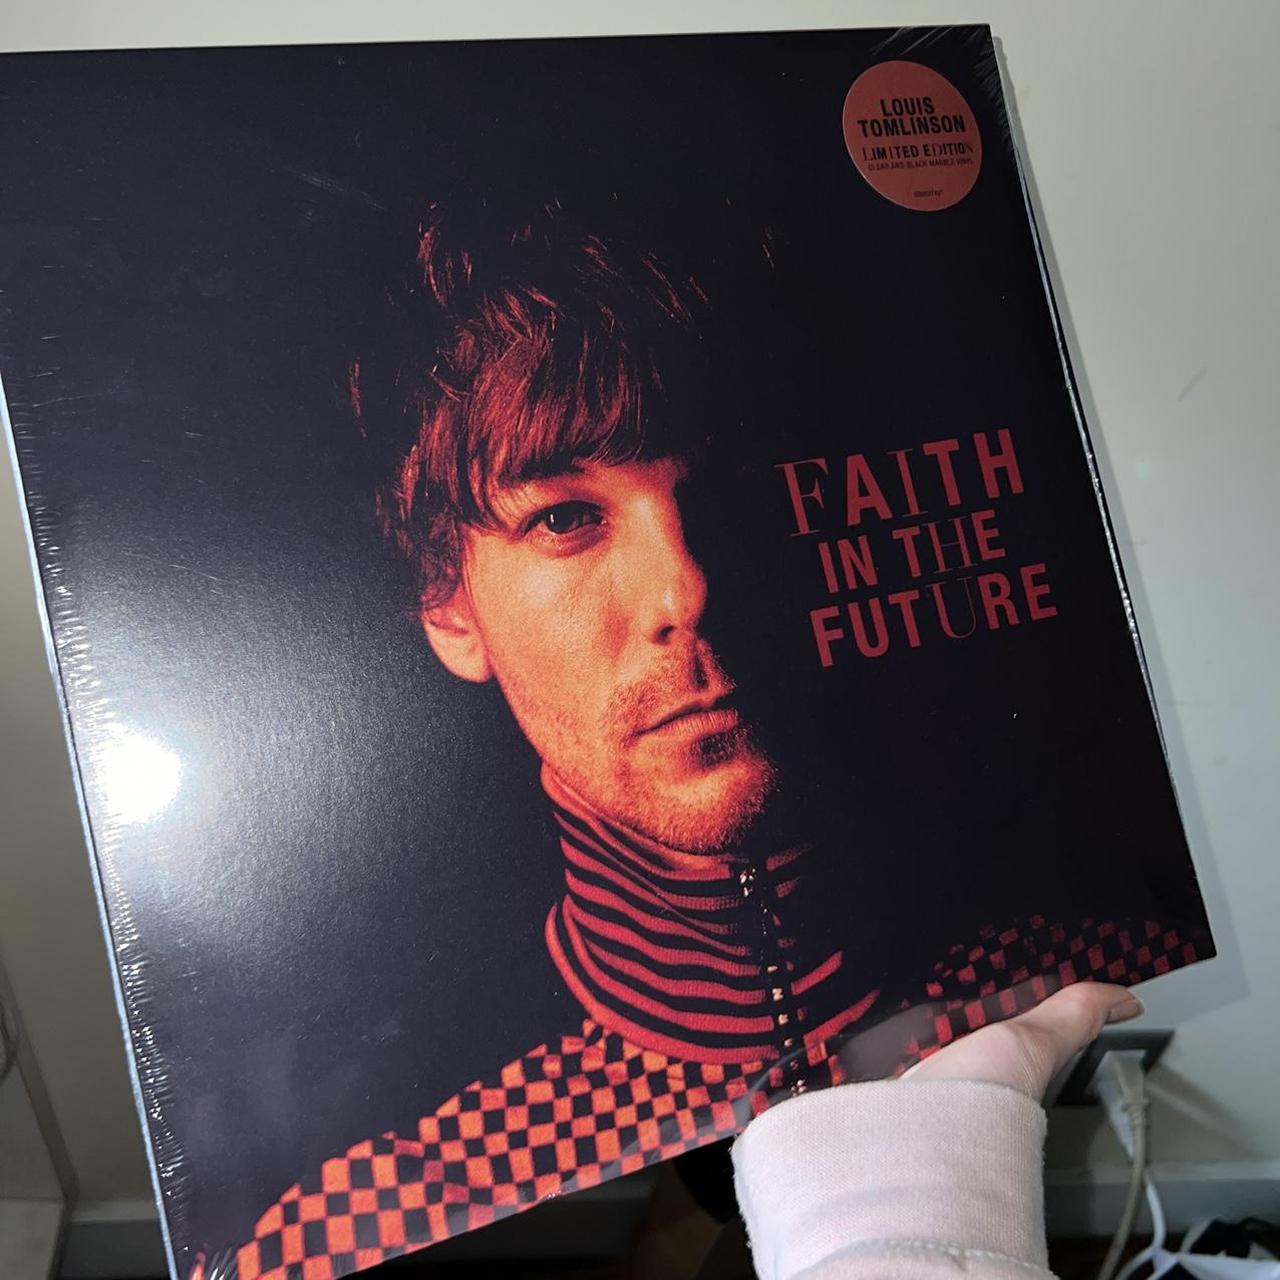 Louis Tomlinson - Faith In The Future - Spotify Exclusive Clear